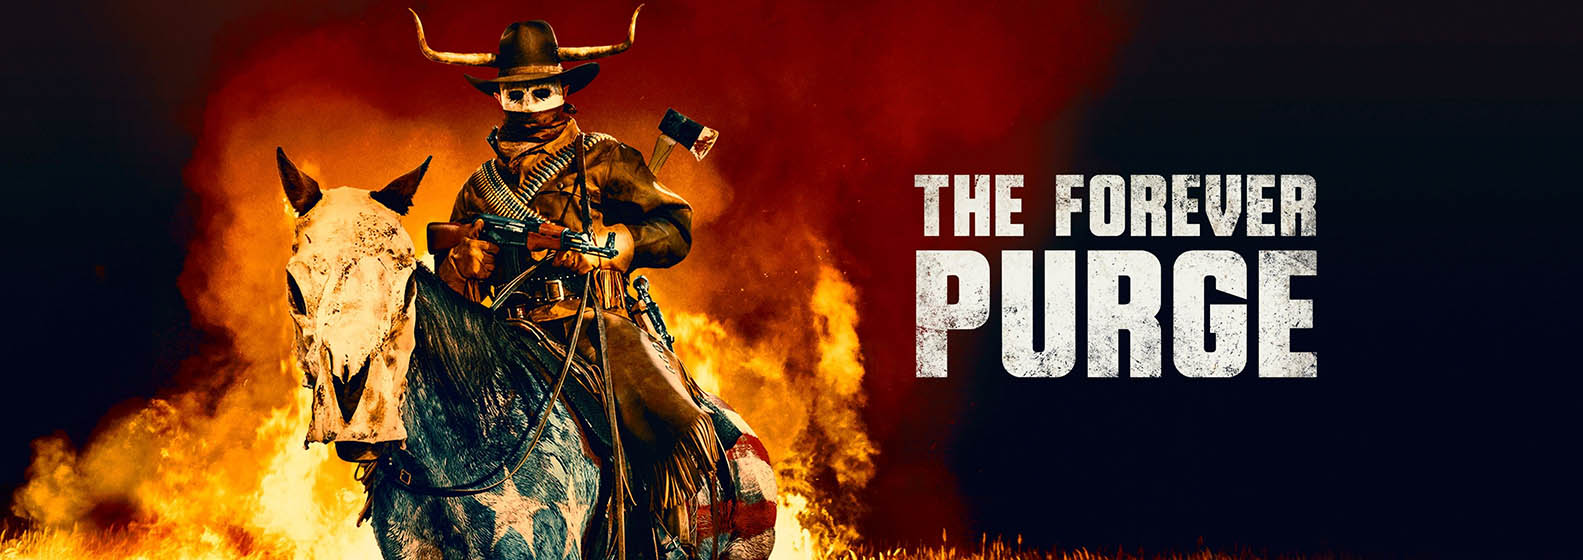 The Forever Purge (2021) - Header Image